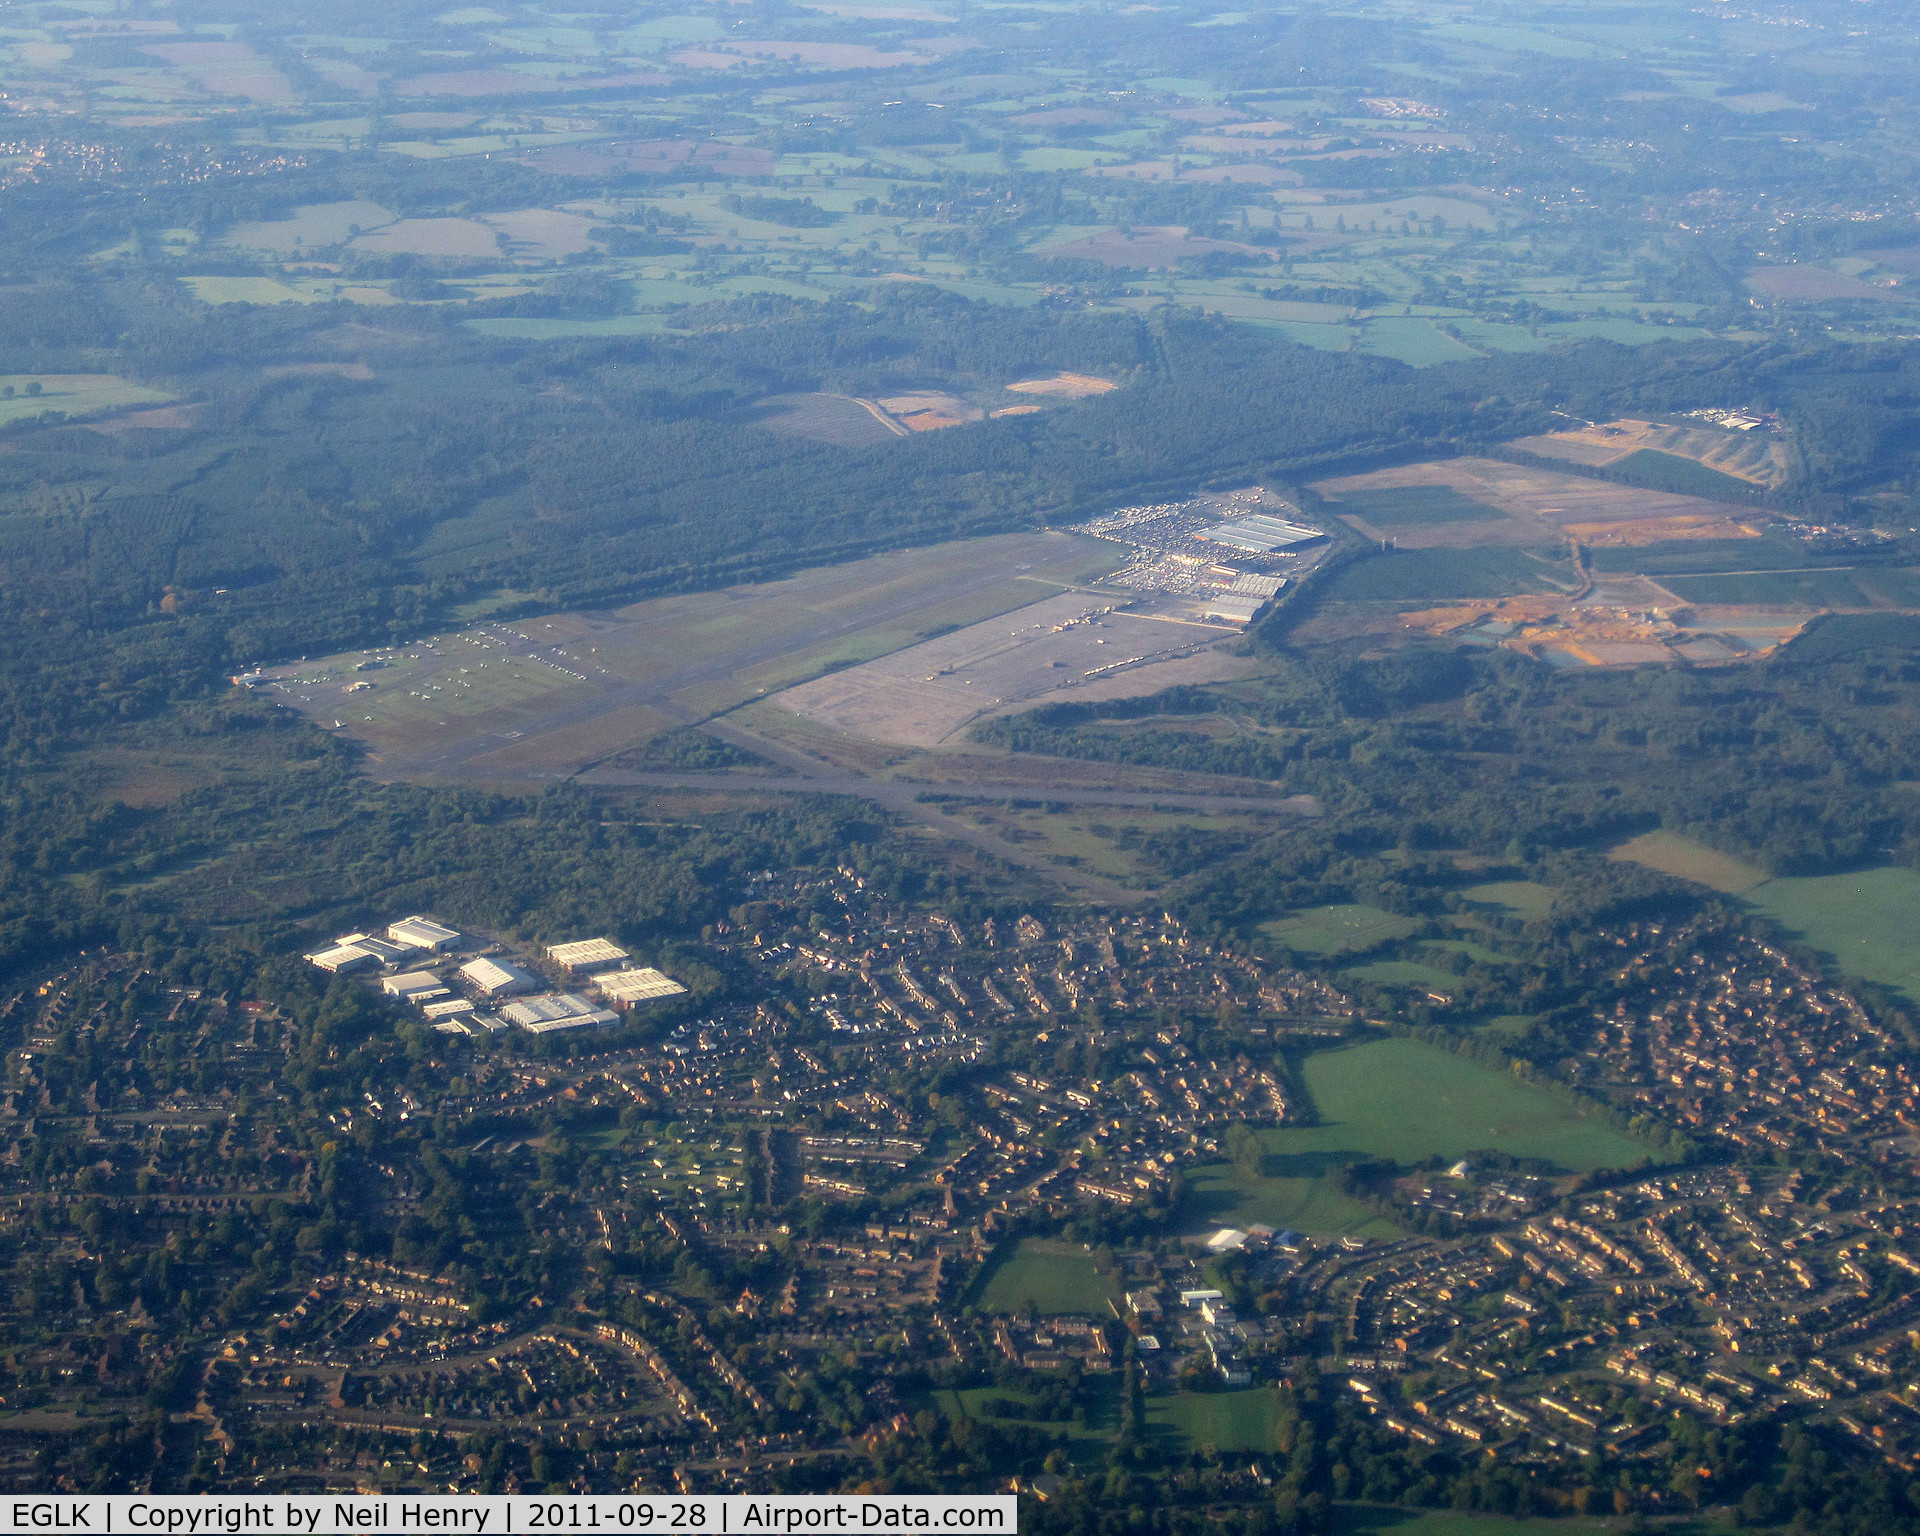 Blackbushe Airport, Camberley, England United Kingdom (EGLK) - taken from flight on approach to London Heathrow 28 Sept 2011 about 08:03 hours